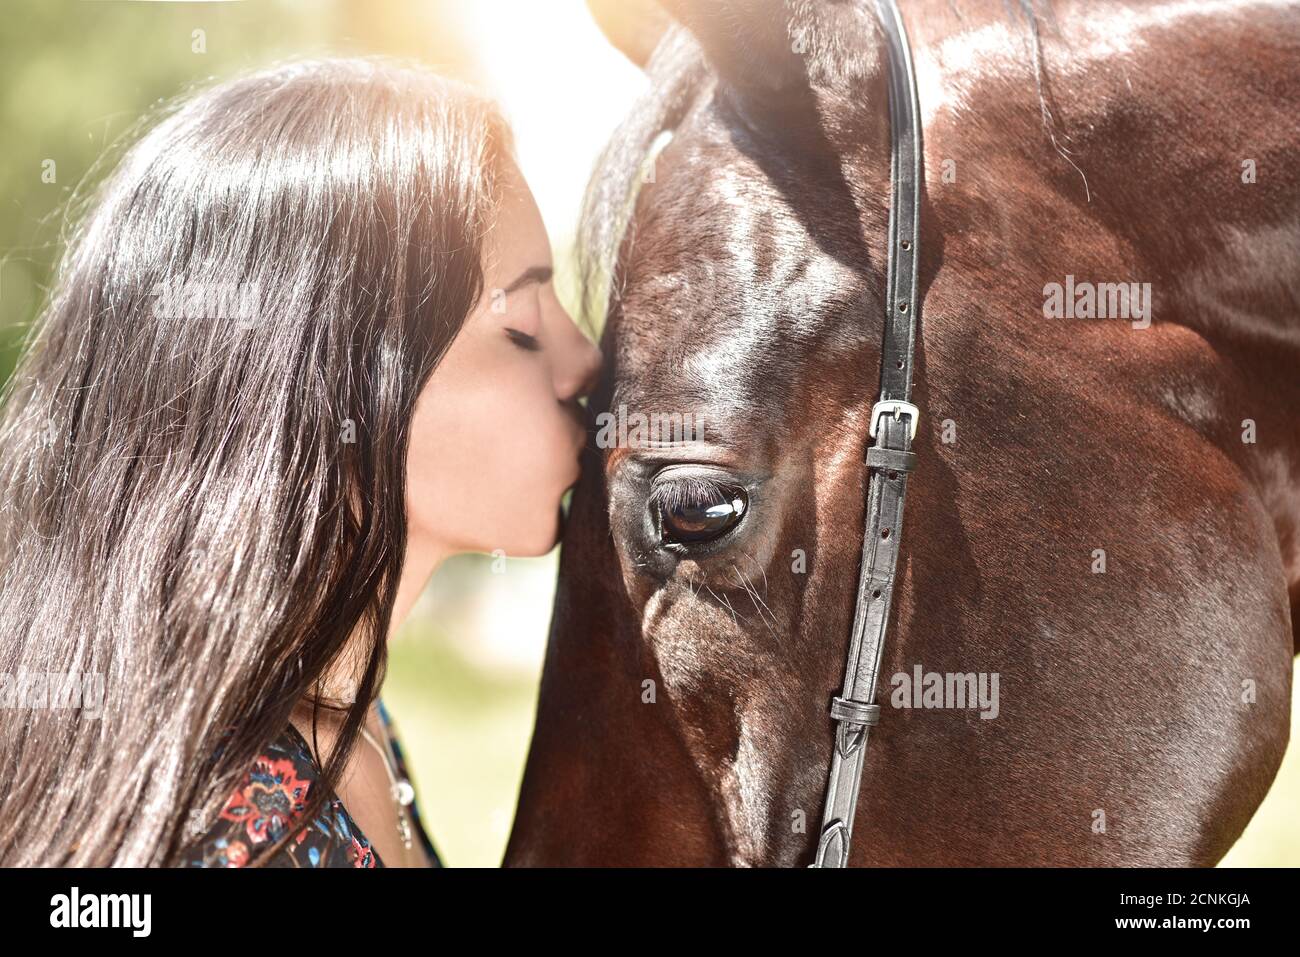 Horse and girl share an emotional moment in close up shot as they appear to kiss. face to face. love animals concept. love horse Stock Photo